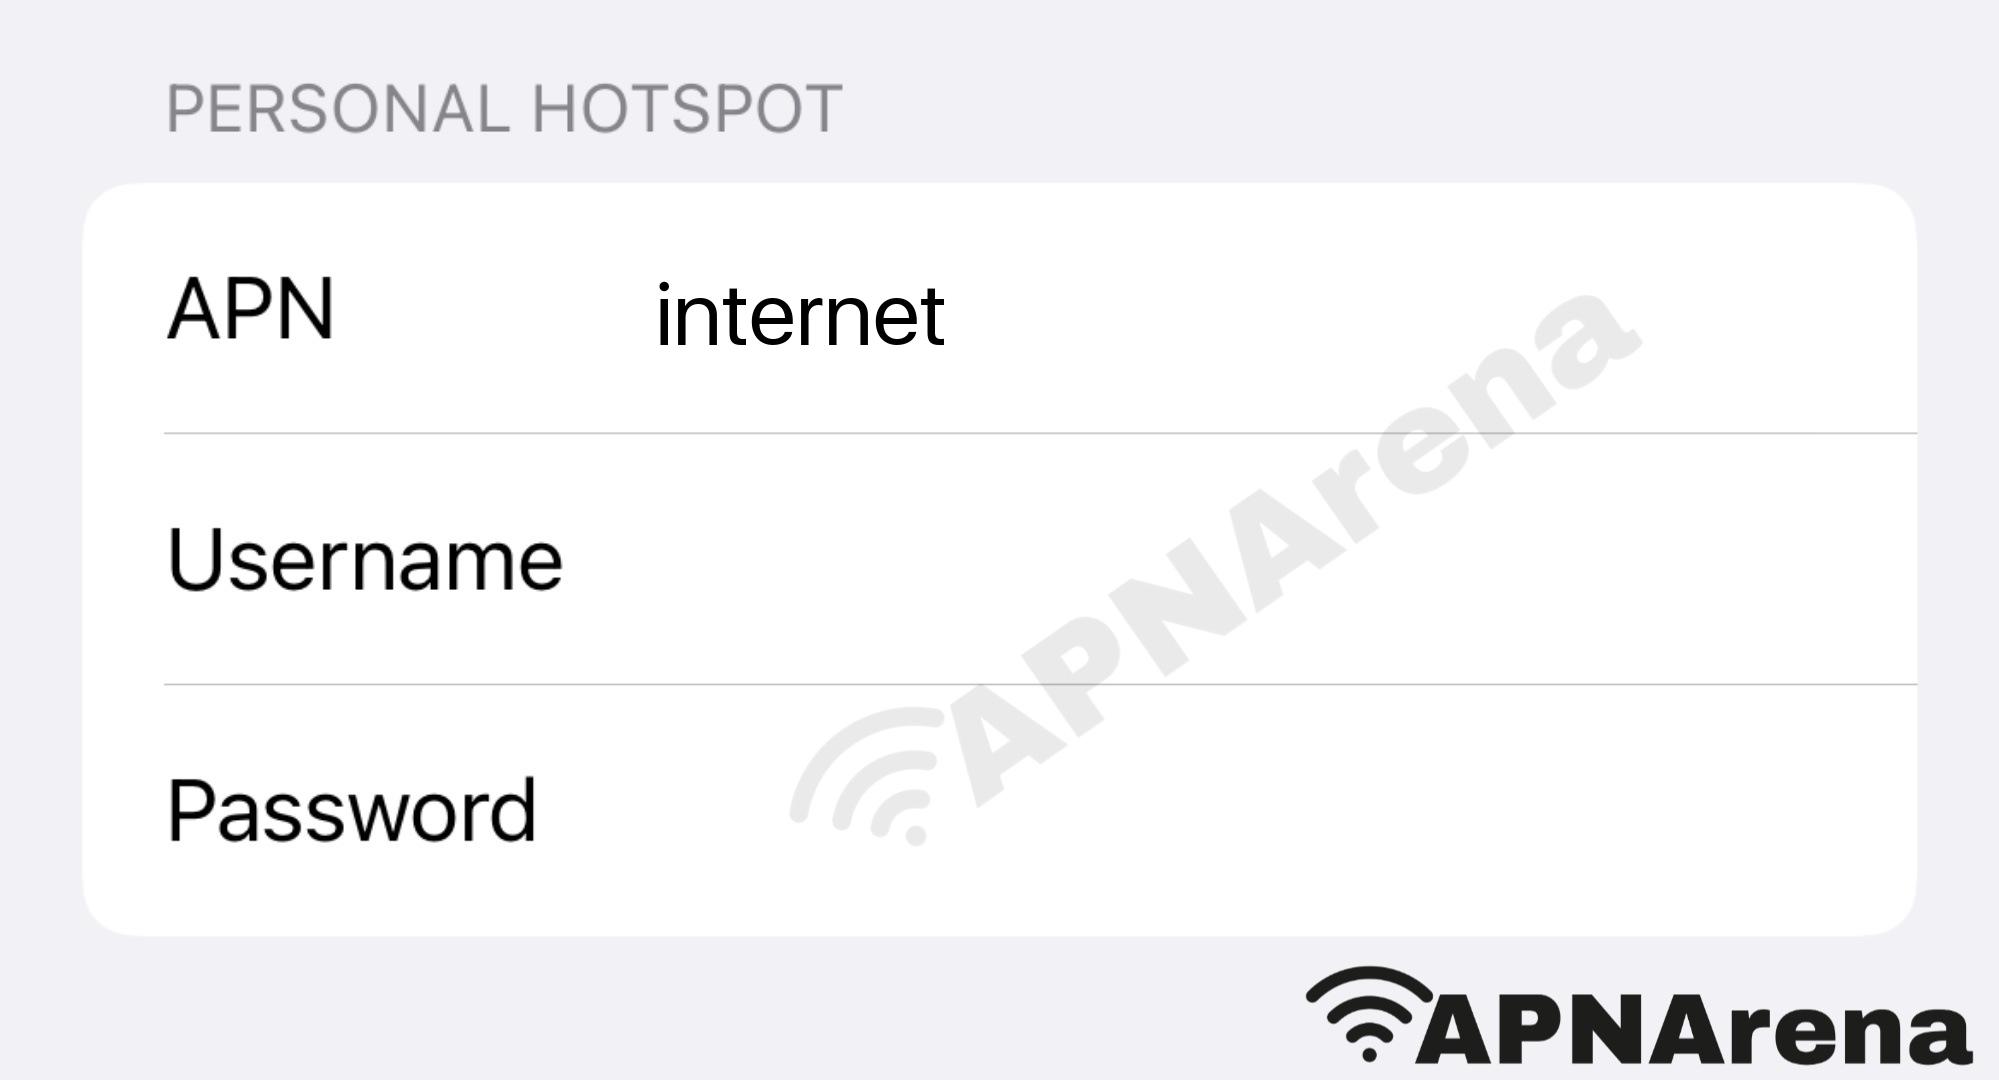 Next G Mobile Personal Hotspot Settings for iPhone